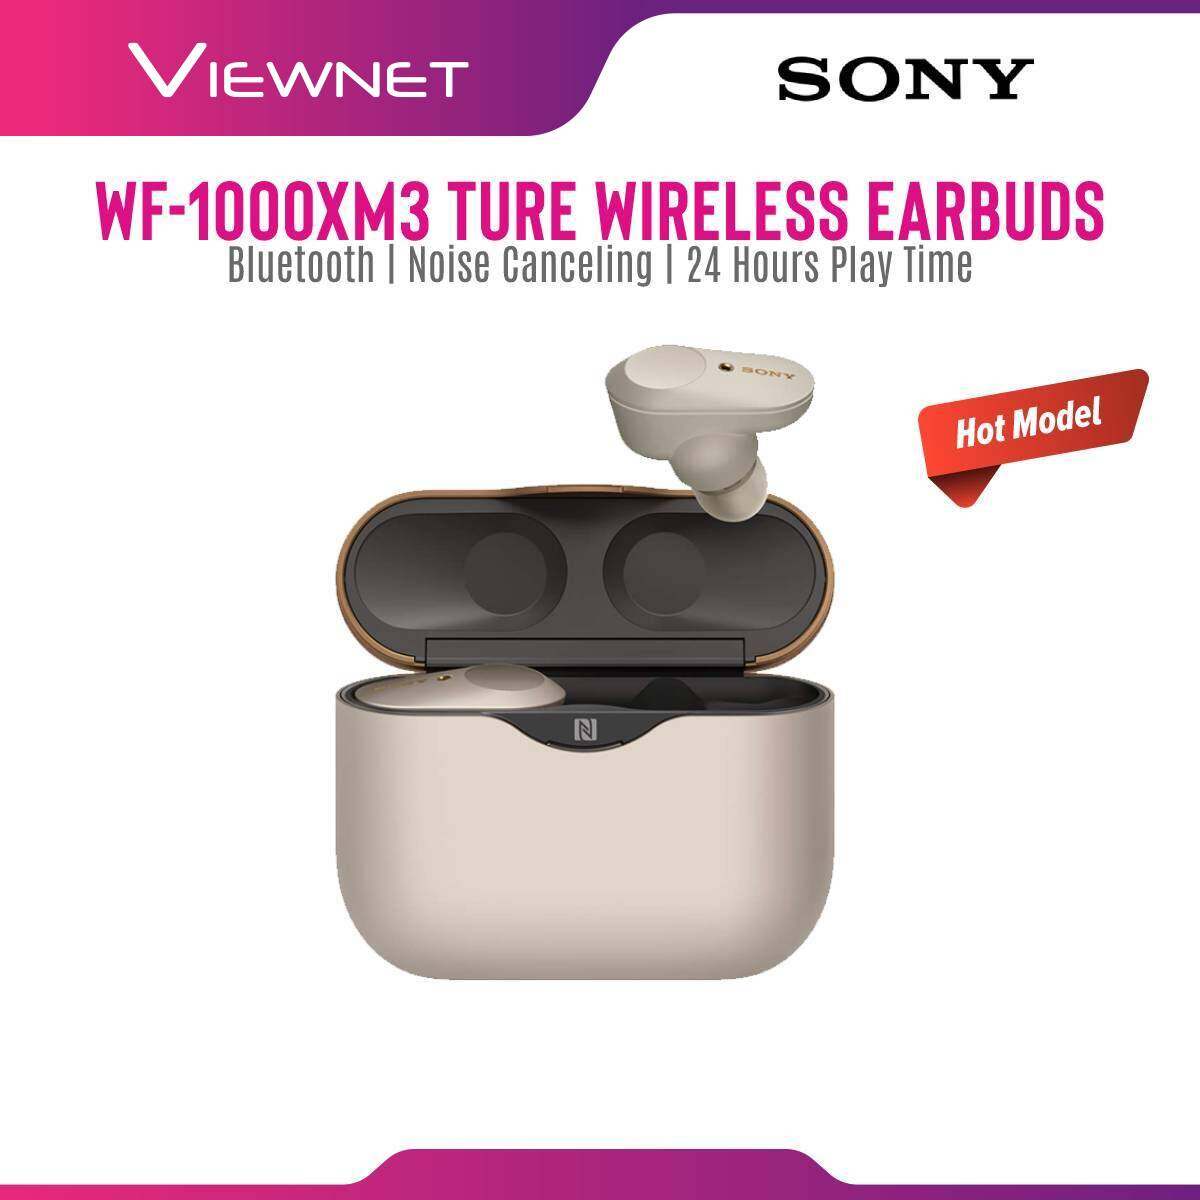 [HOT MODEL] Sony WF-1000XM3 WF1000XM3 Premium Bluetooth Wireless Noise Cancelling In-ear Headphones Earbuds with Charging Case